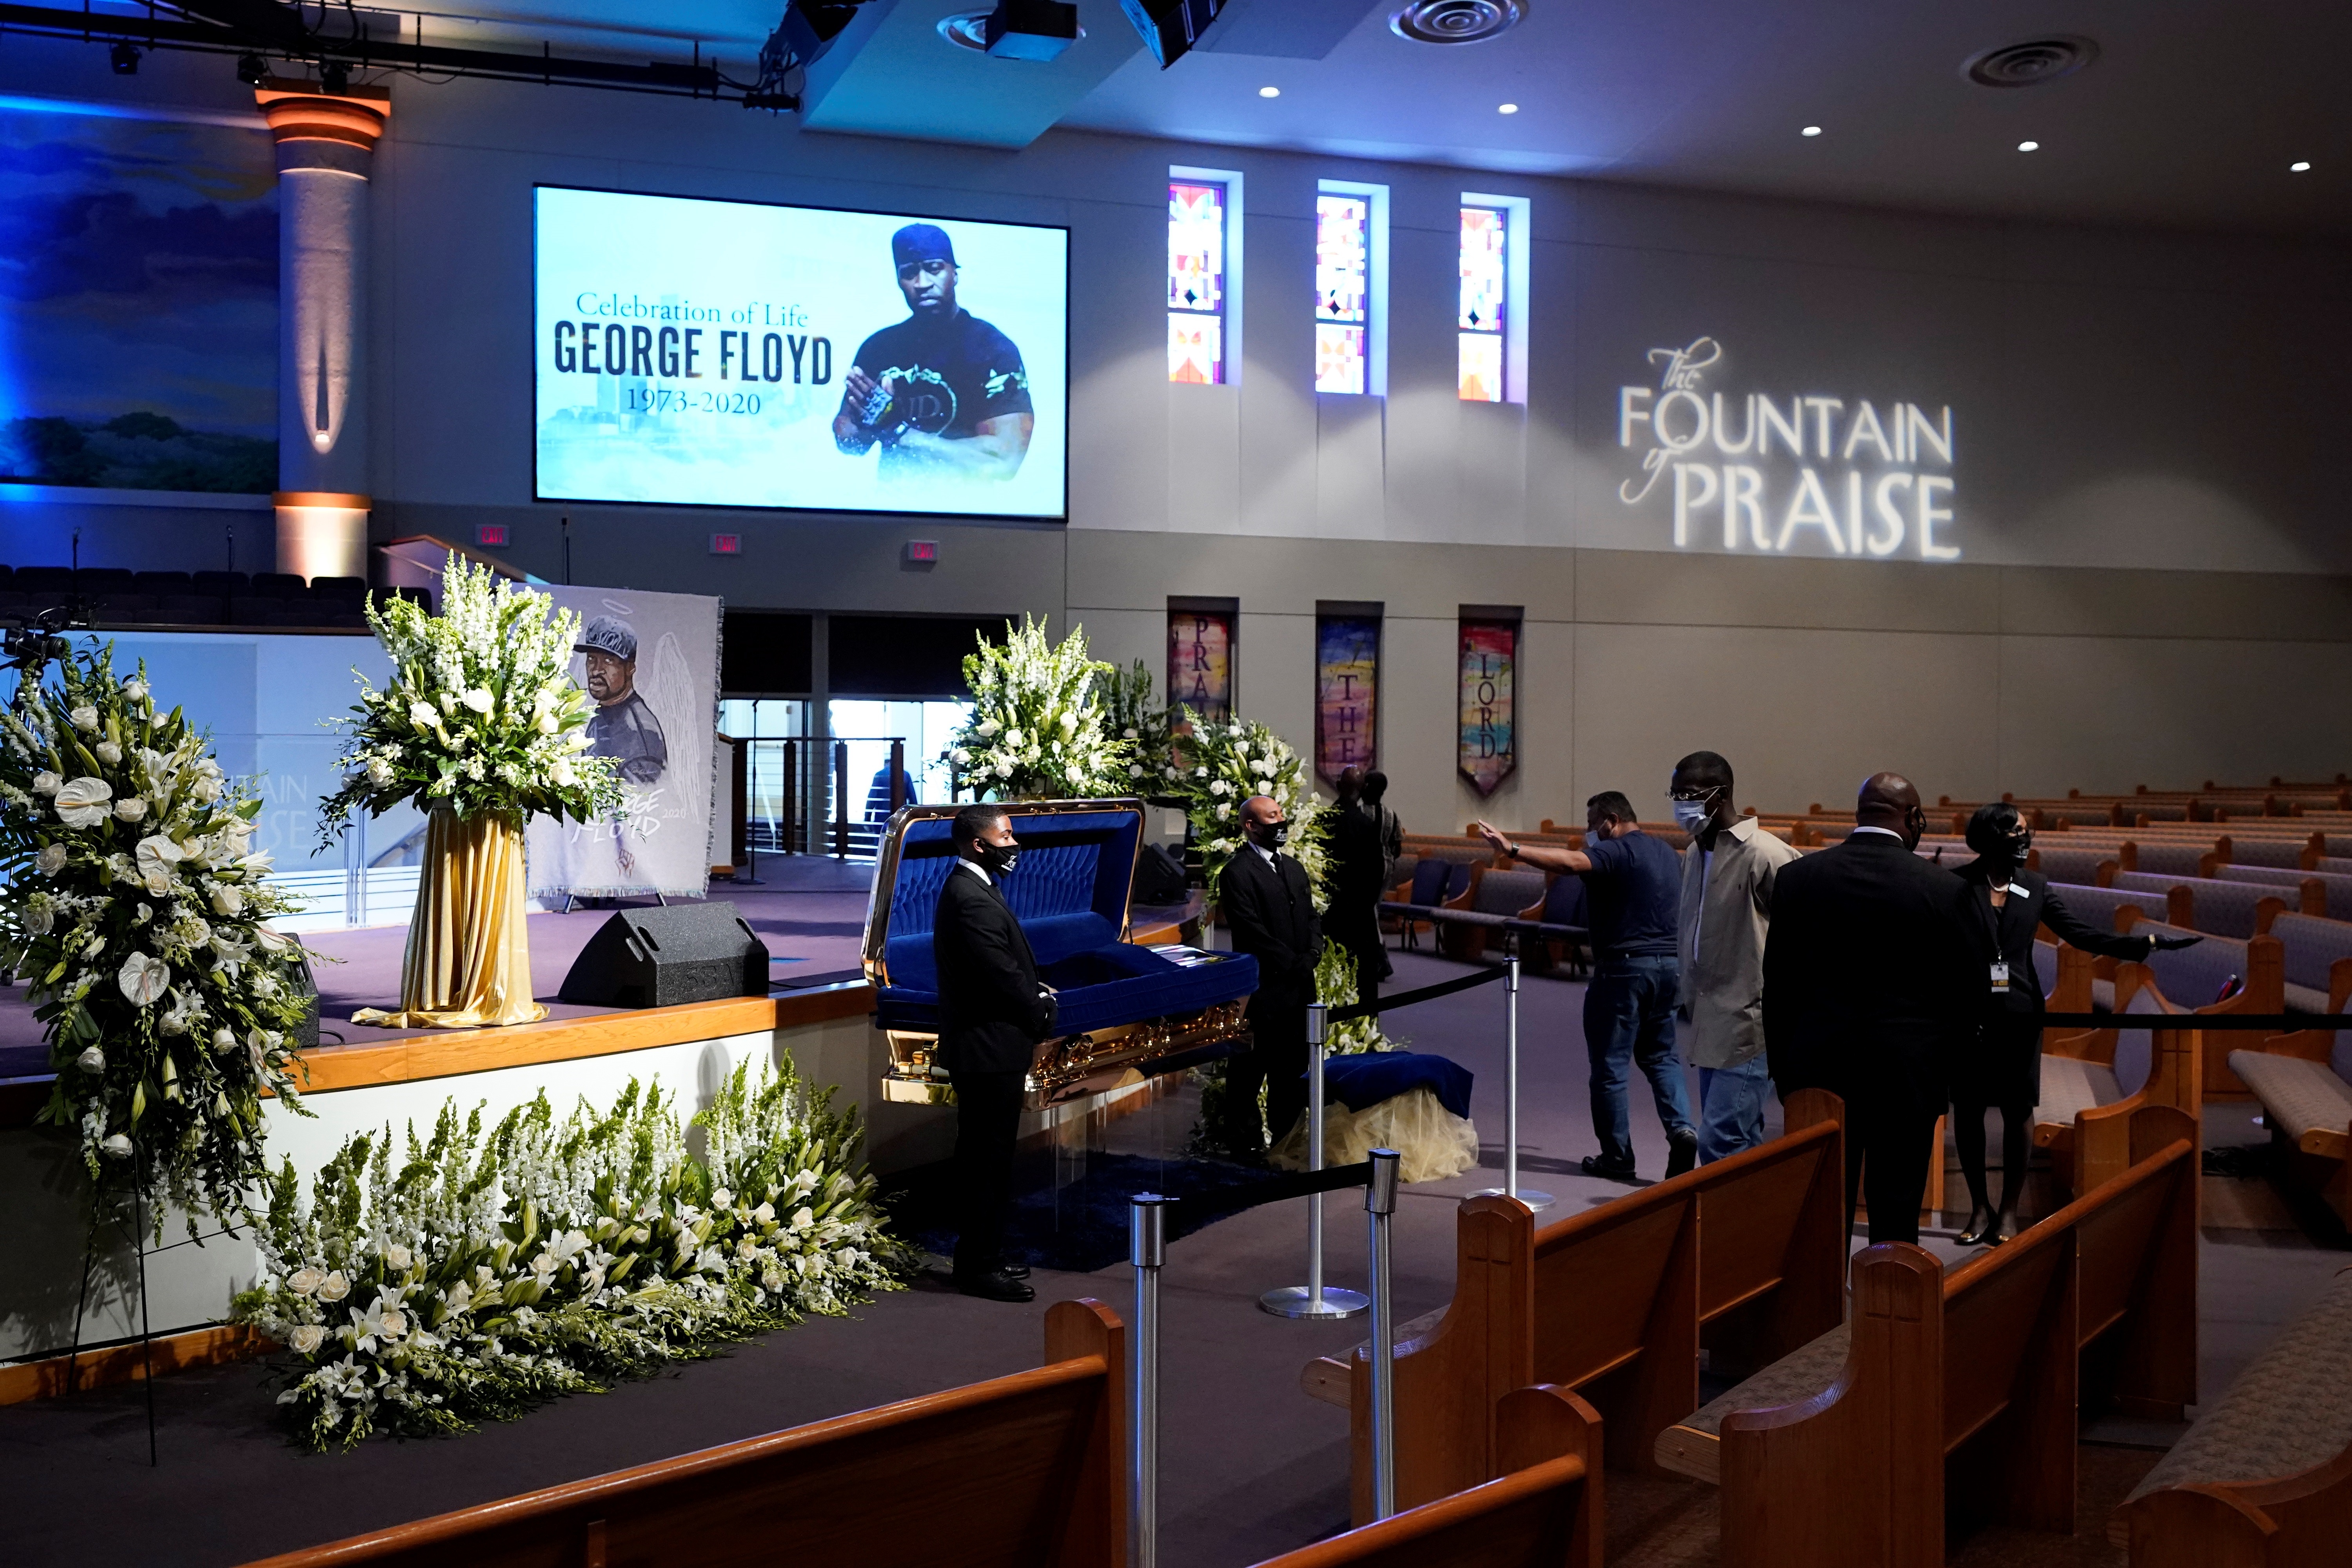 Mourners pass the casket of George Floyd during a public visitation for Floyd at the Fountain of Praise church, in Houston, Texas, USA, 08 June 2020. EFE/David J. Phillip
